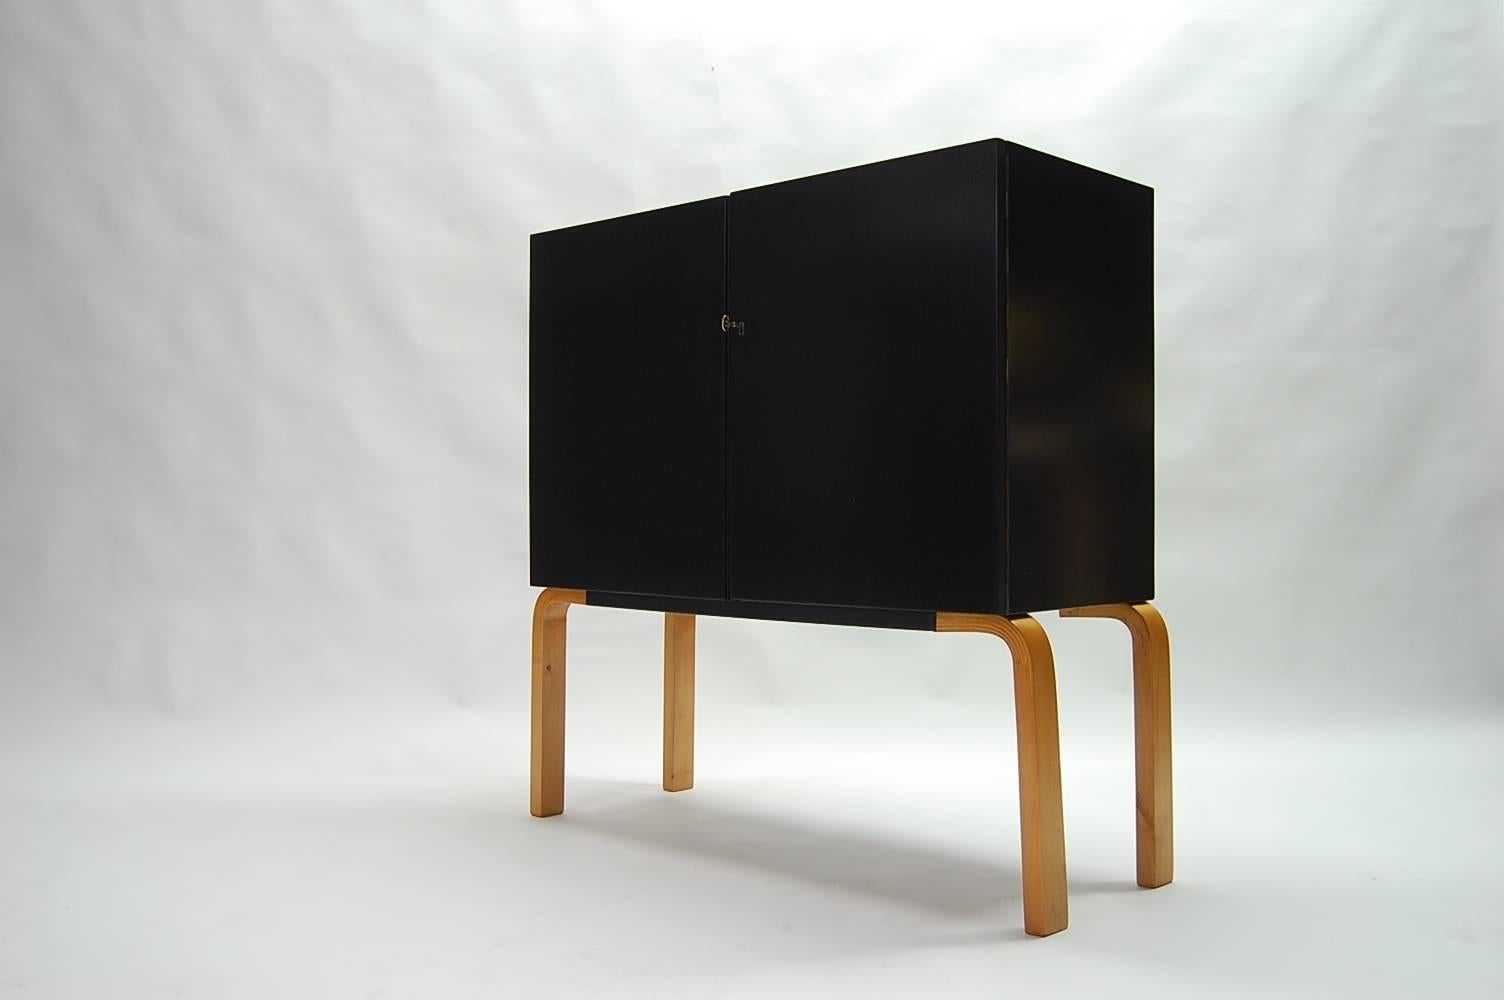 Alvar Aalto two door cabinet with adjustable shelves, circa 1938. Cabinet in new black lacquer, legs in natural birch. Doors are lockable, brass key and escutcheon. Interior has five adjustable shelves (two half depth shelves and three full depth